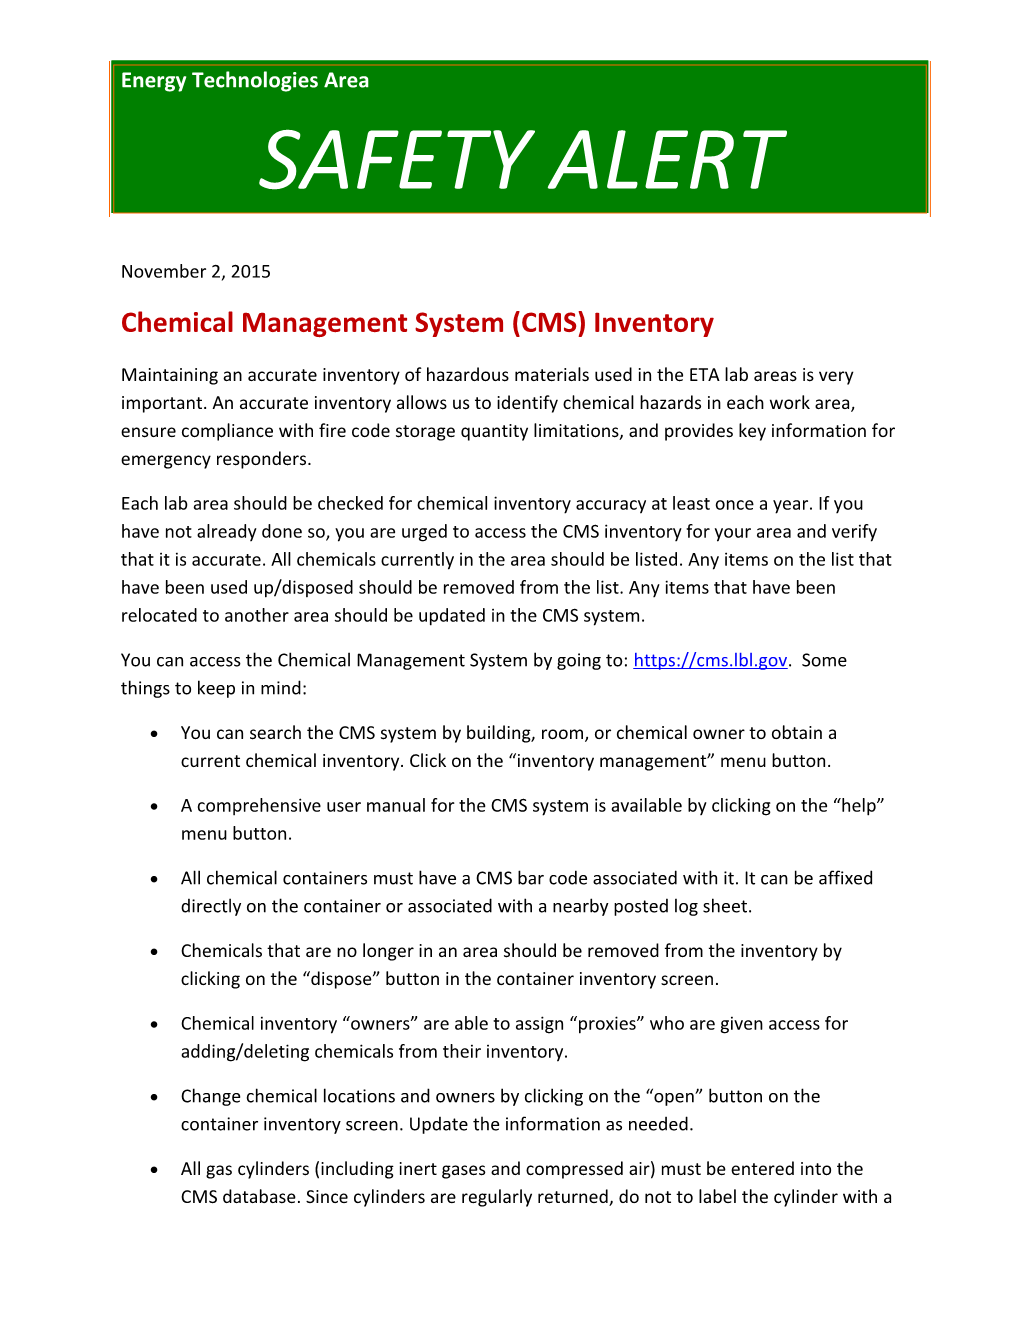 Chemical Management System (CMS) Inventory